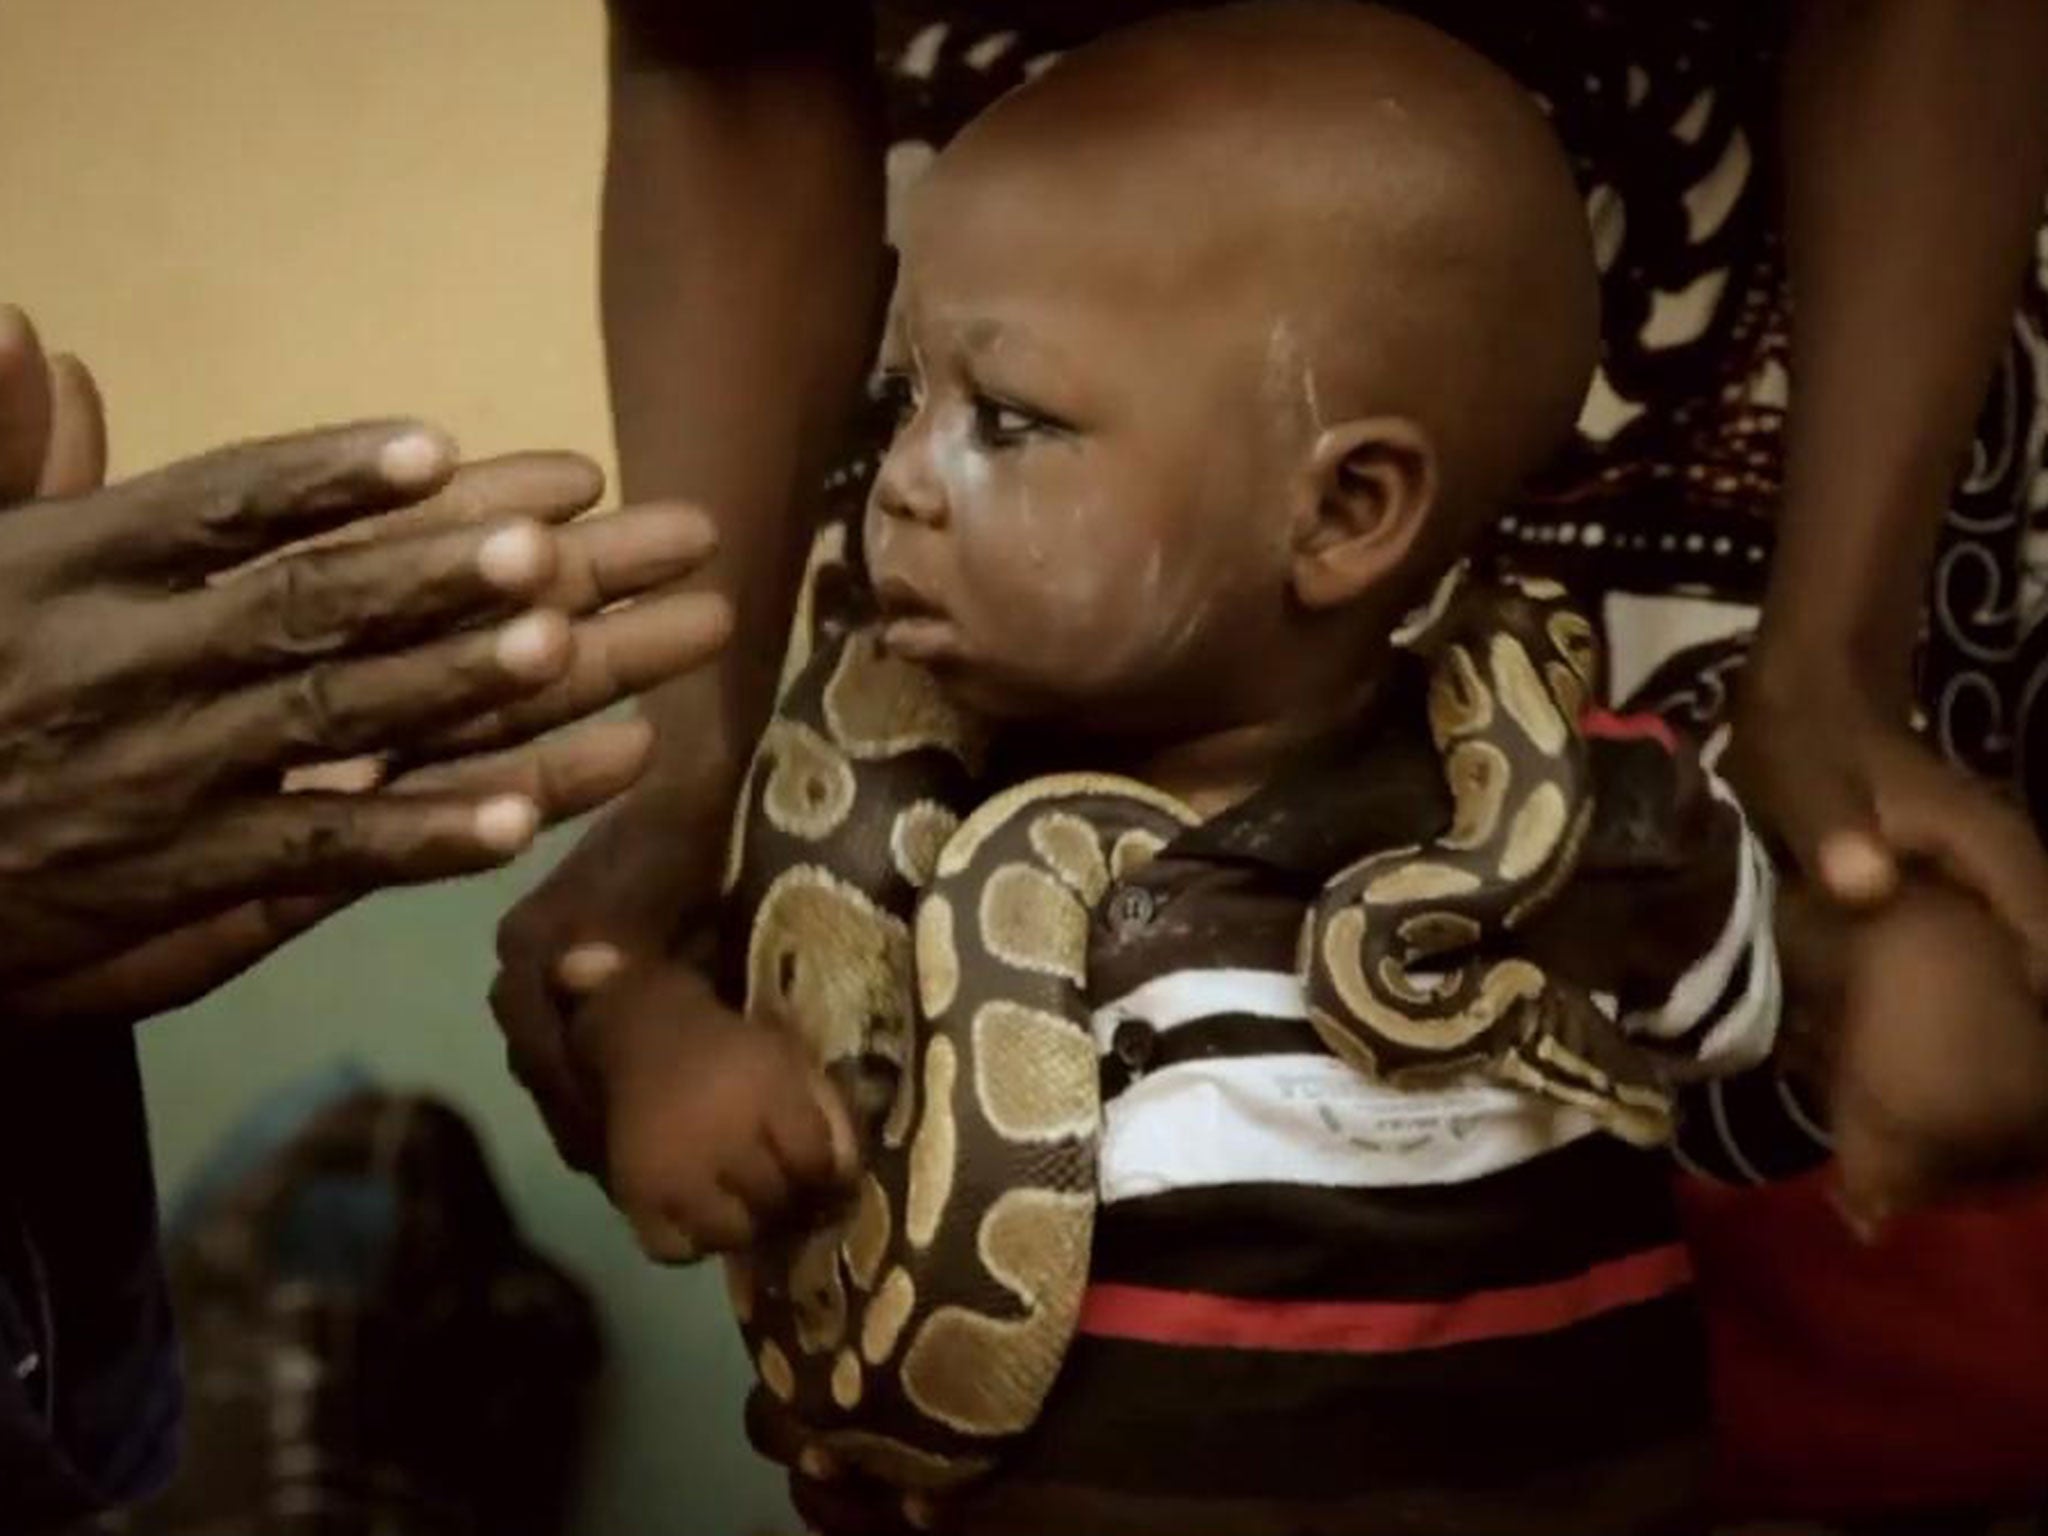 Meet the eccentric Nigerian men who play with hyenas and snakes for show [Video]